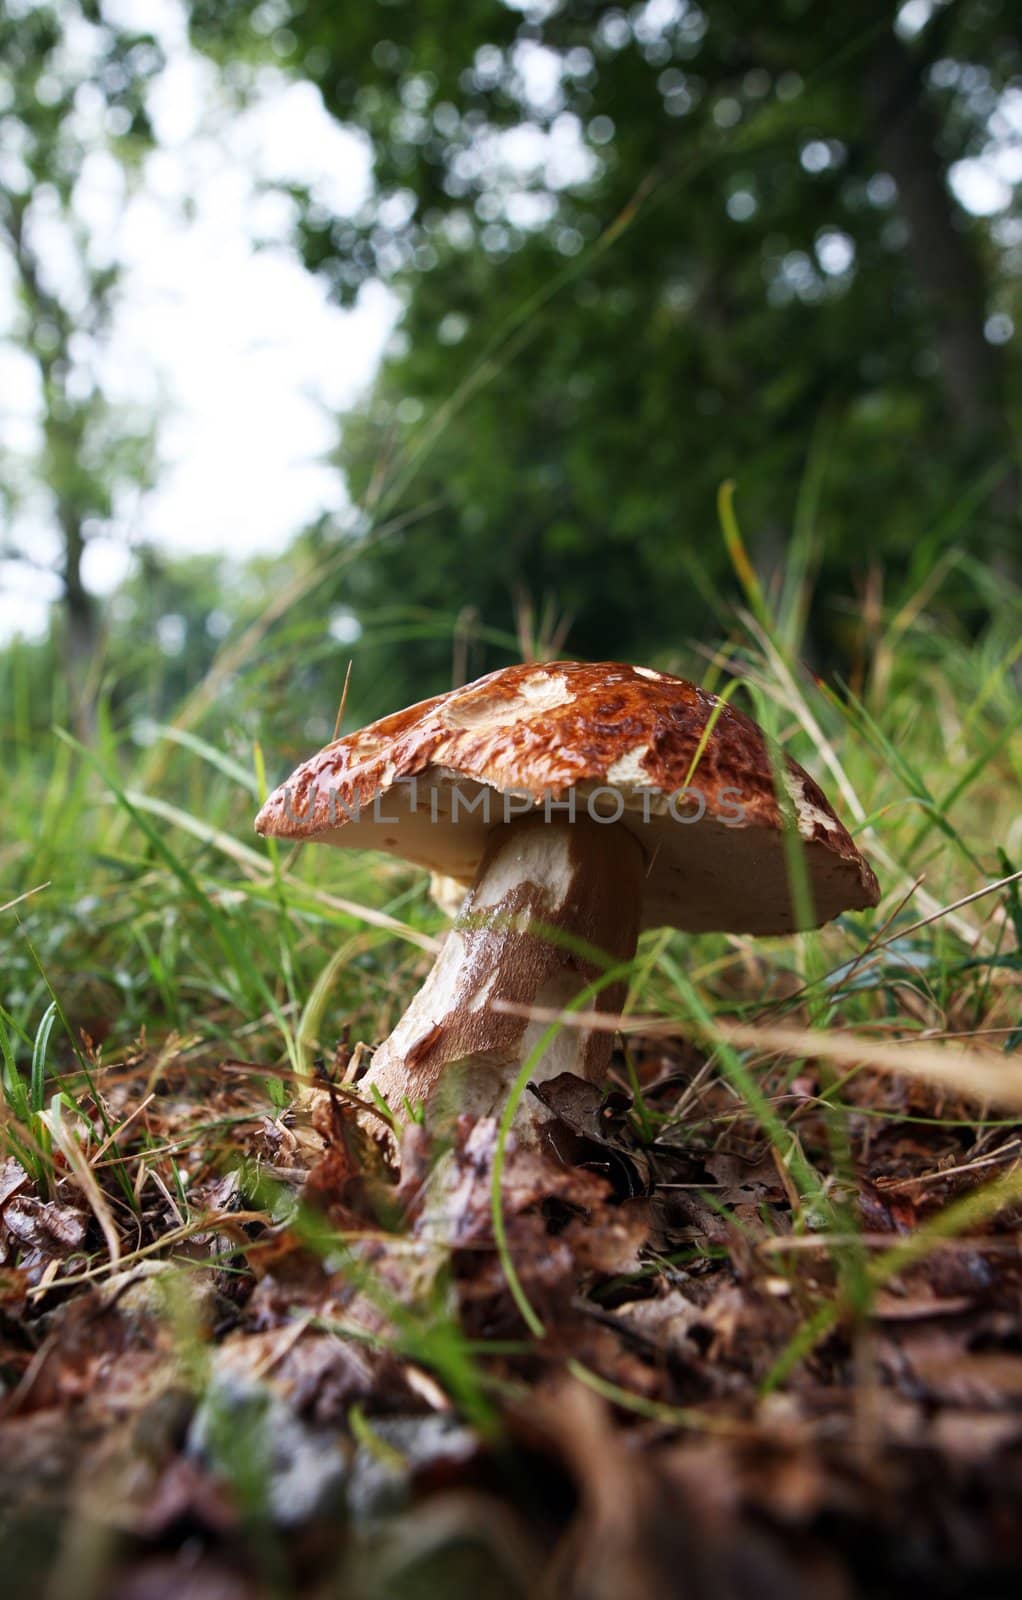 wild growing mushrooms in the grass